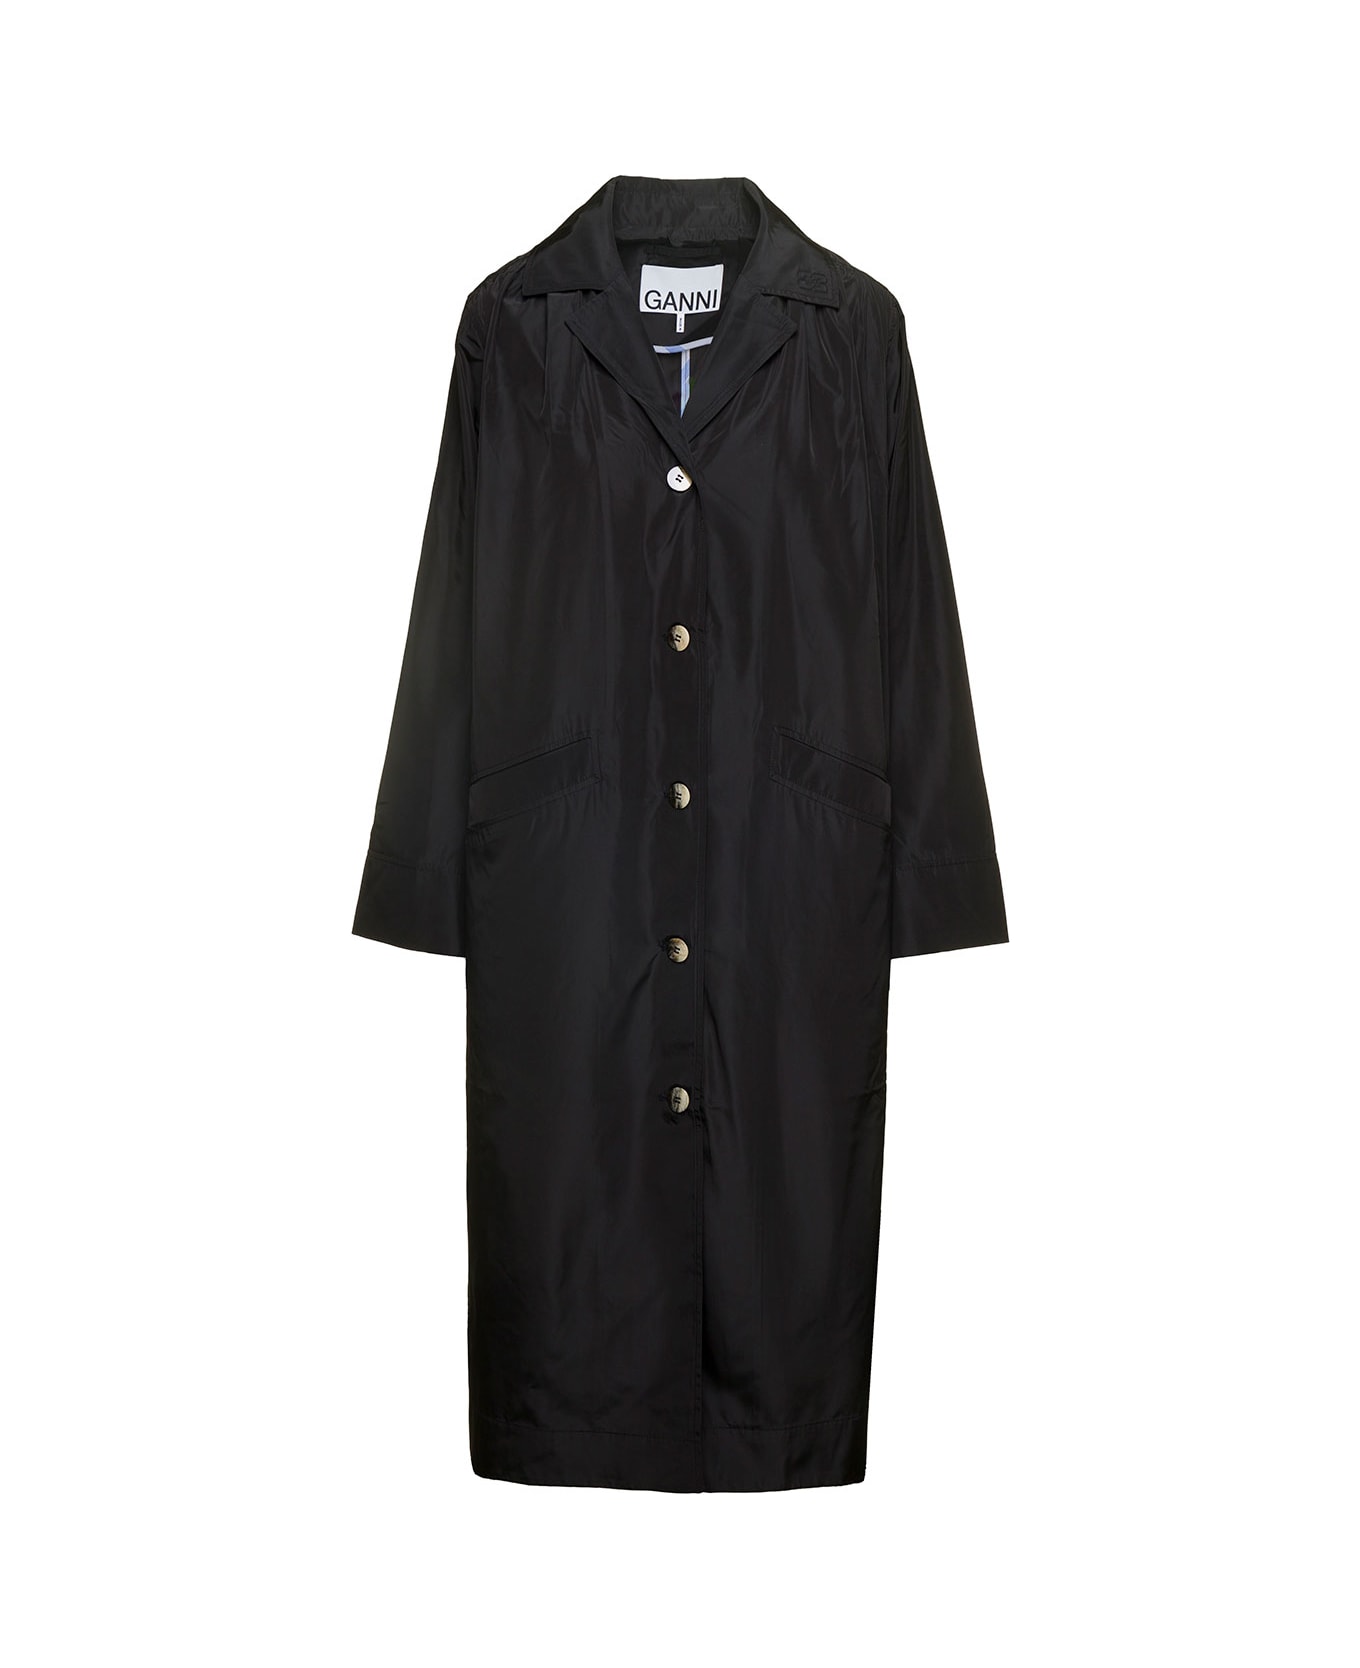 Ganni 'summer' Long Black Single-breasted Trench Coat With Buttons And Patch Pockets In Recycled Tech Fabric Woman - Black